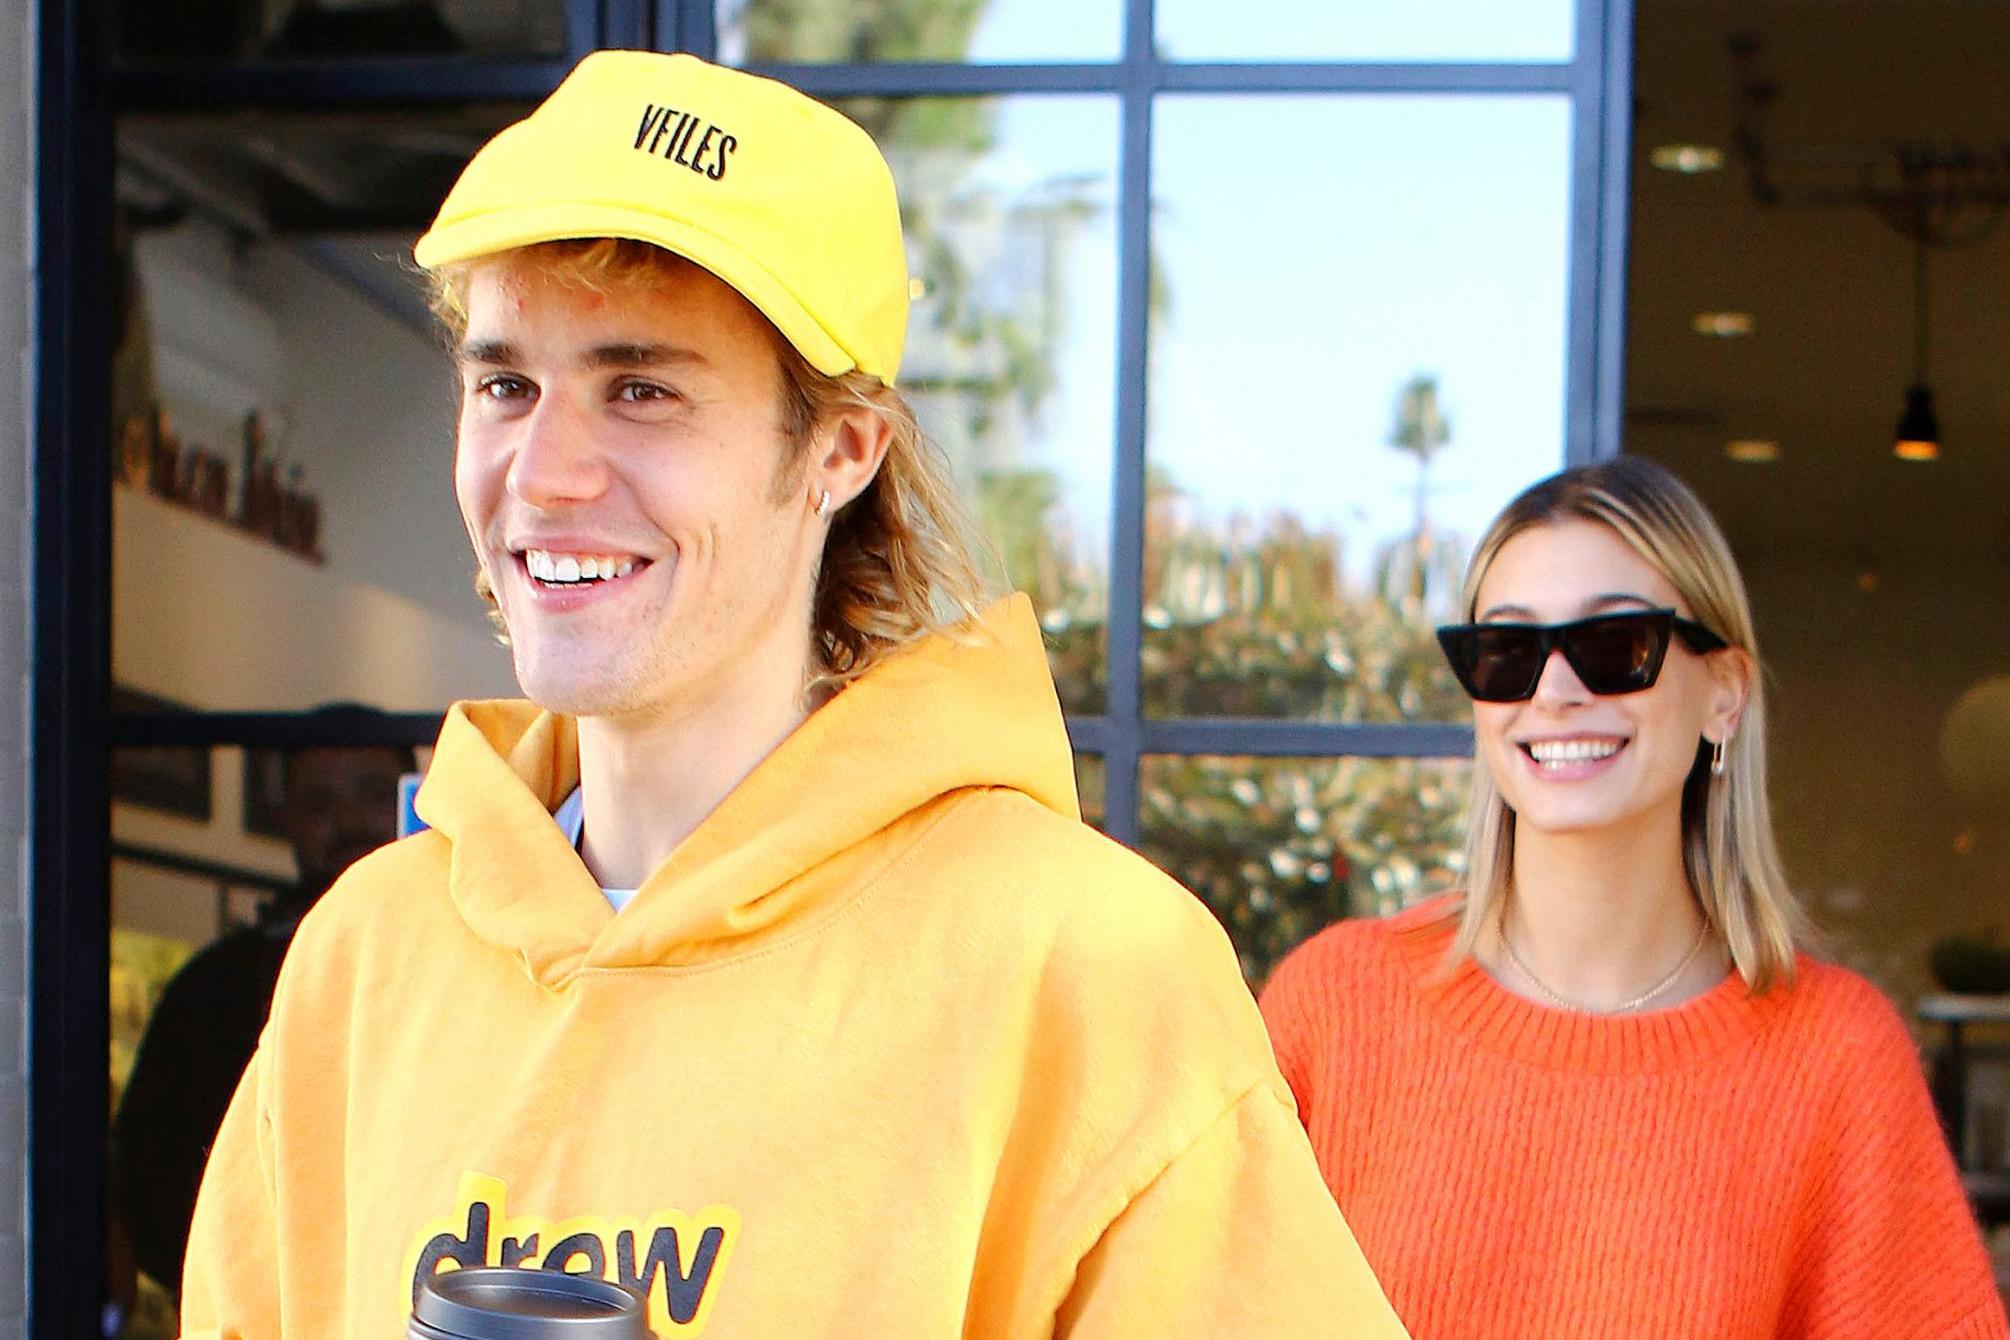 Justin Bieber Hosts First Thanksgiving with Wife Hailey Baldwin